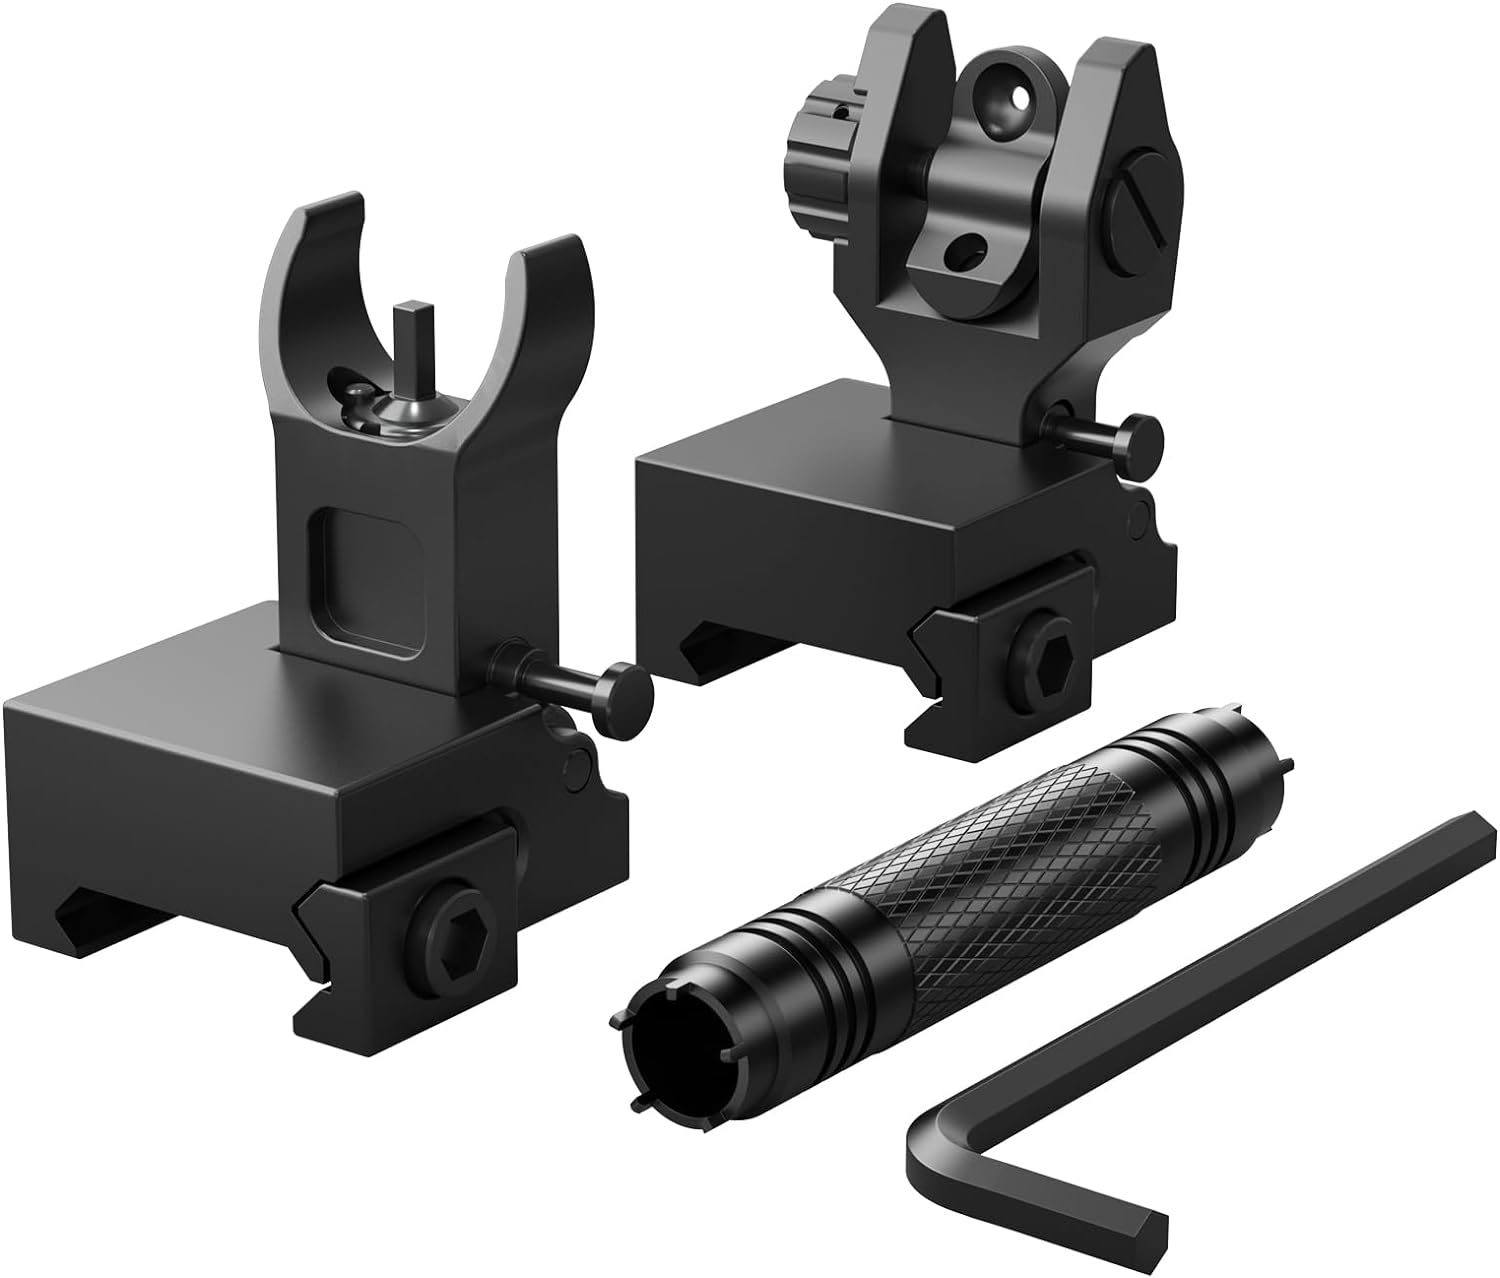 Feyachi S29 Flip Up Rear Front and Iron Sights with Adjustable Tool - Perfect Backup for Picatinny & Weaver Rails